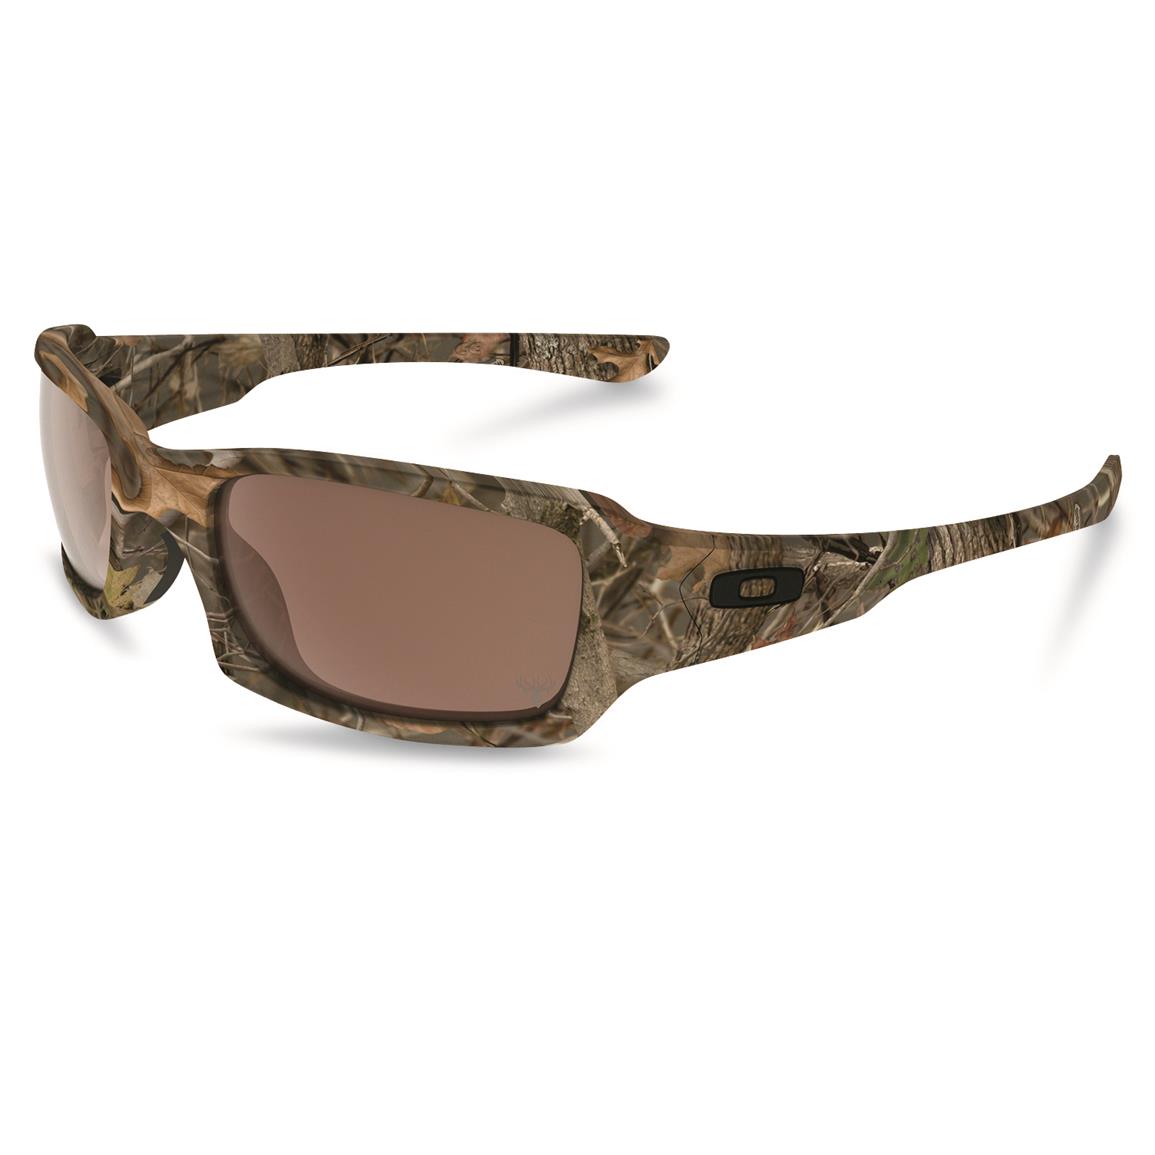 Oakley Fives Squared Sunglasses In King S Camo 678108 Sunglasses And Eyewear At Sportsman S Guide